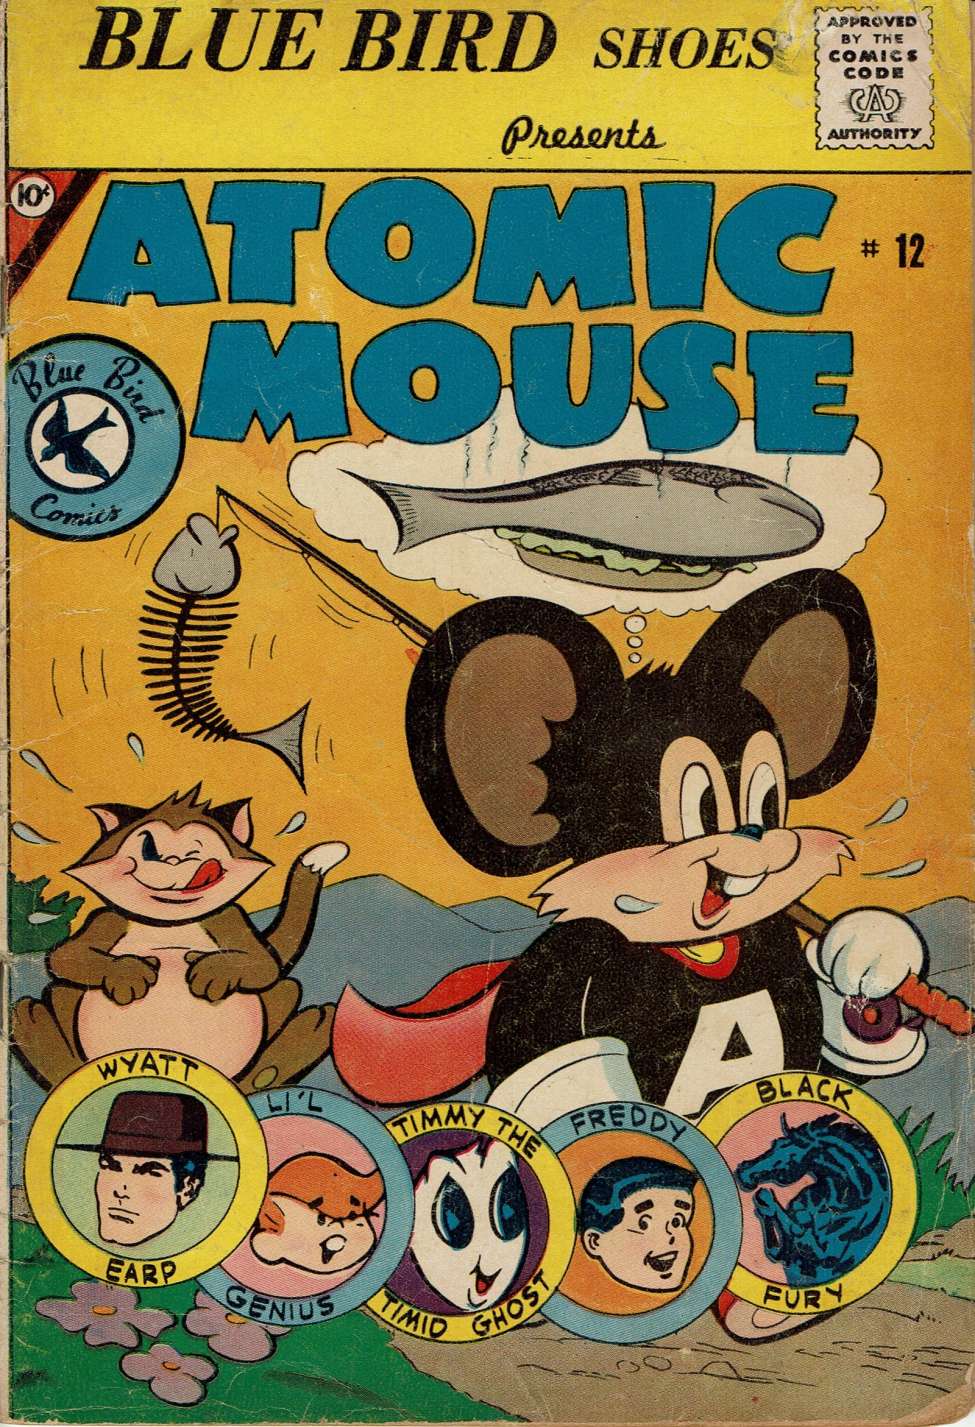 Book Cover For Atomic Mouse 12 (Blue Bird) - Version 2